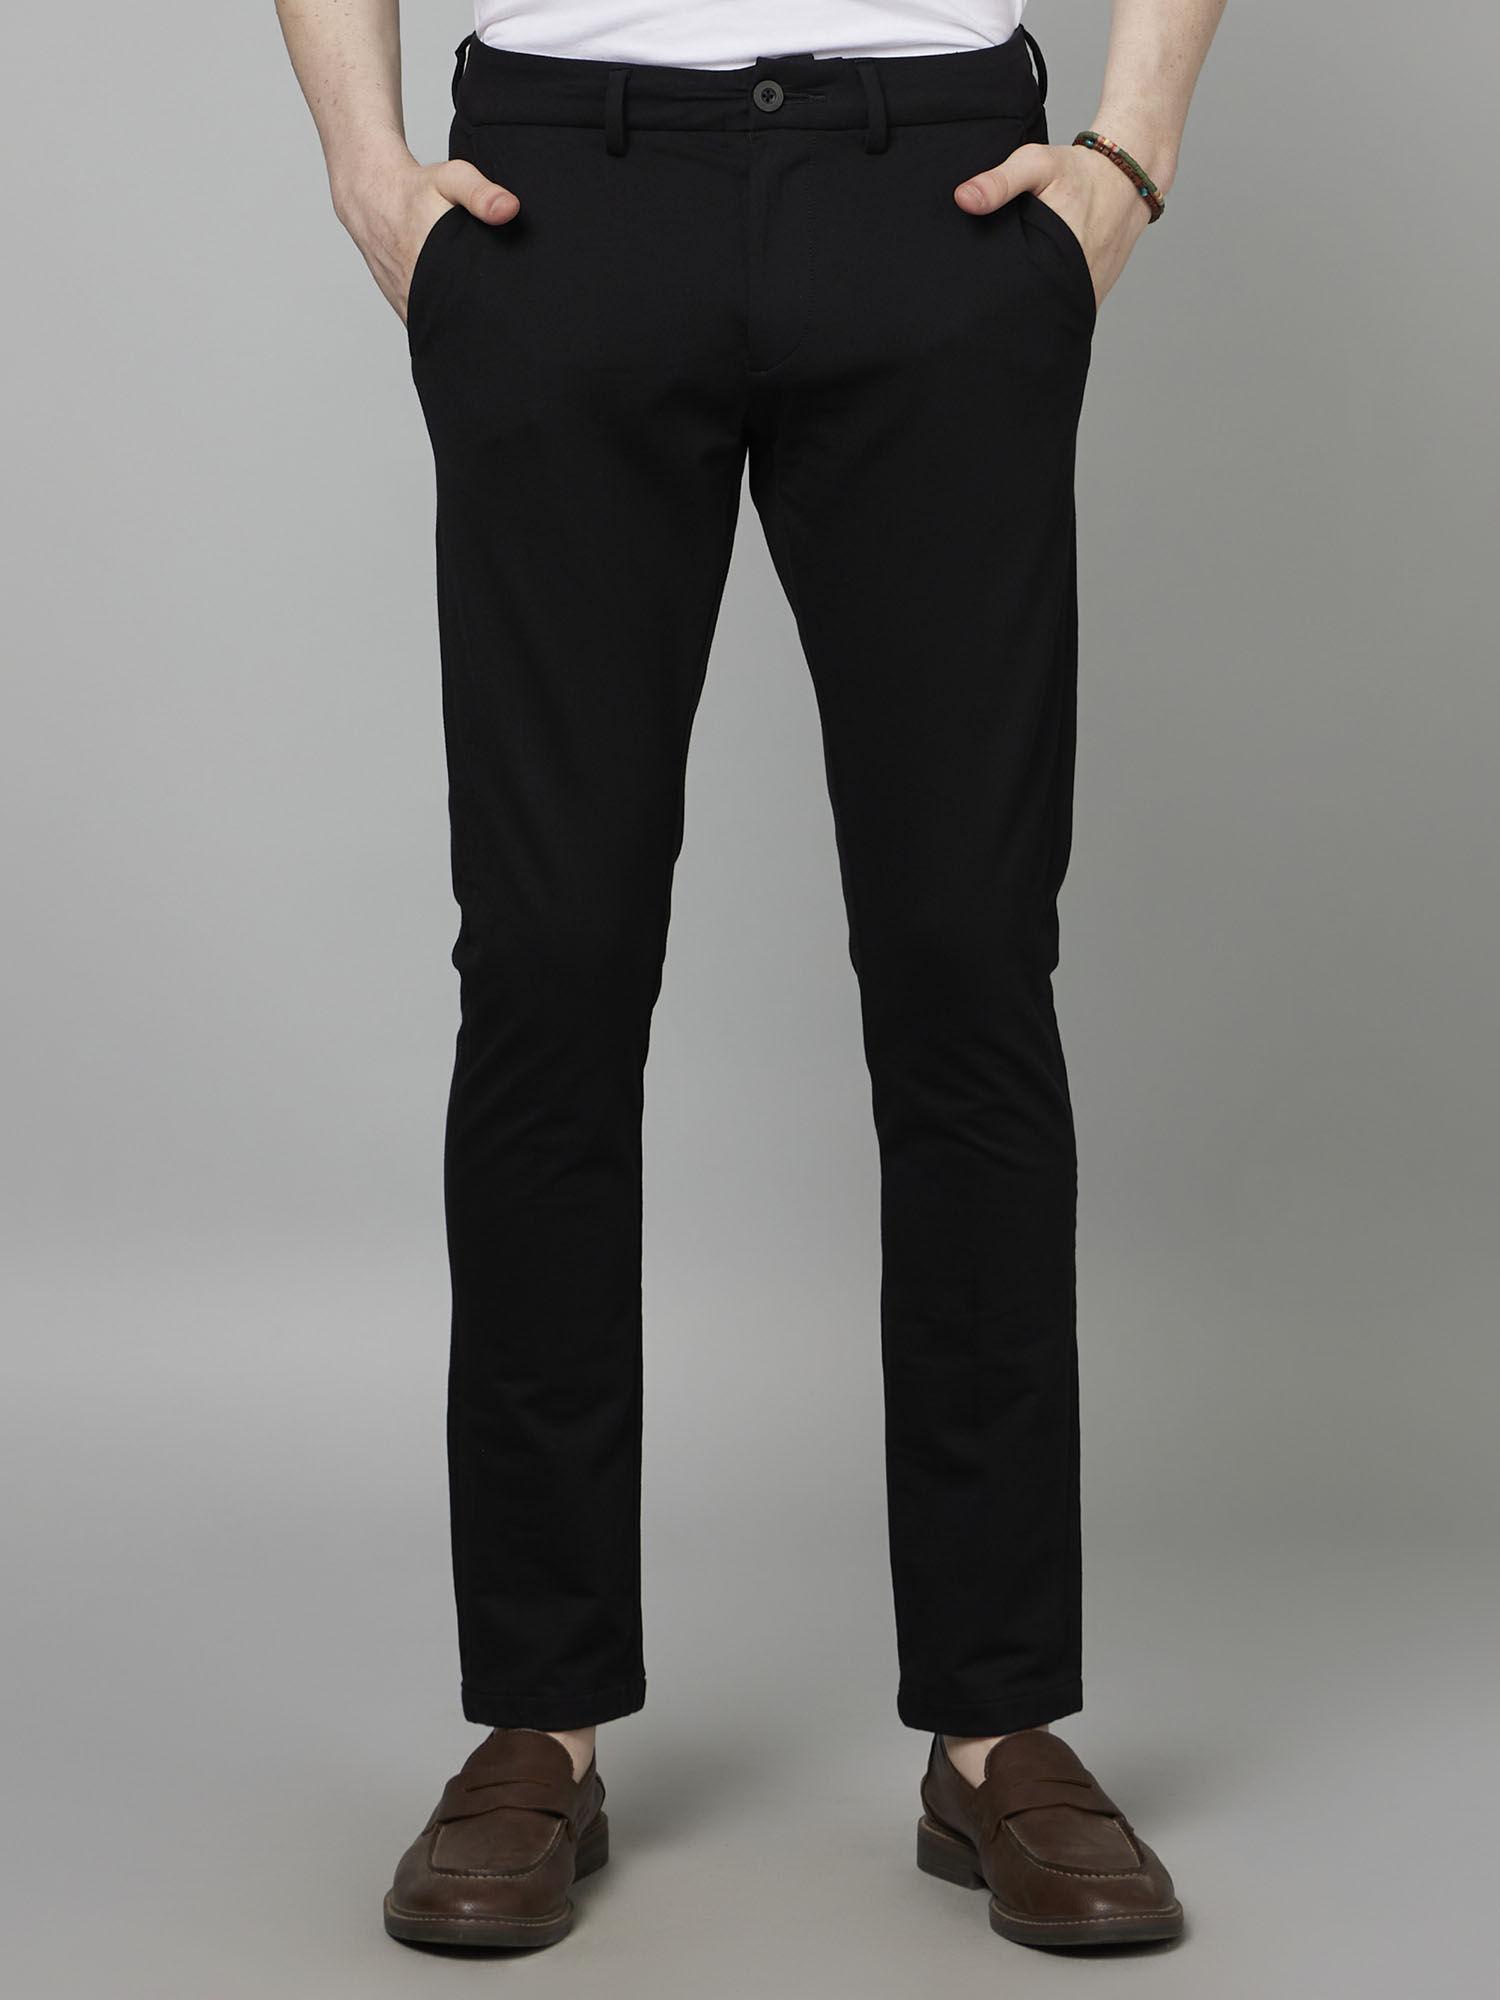 solid black cotton knit chinos pant